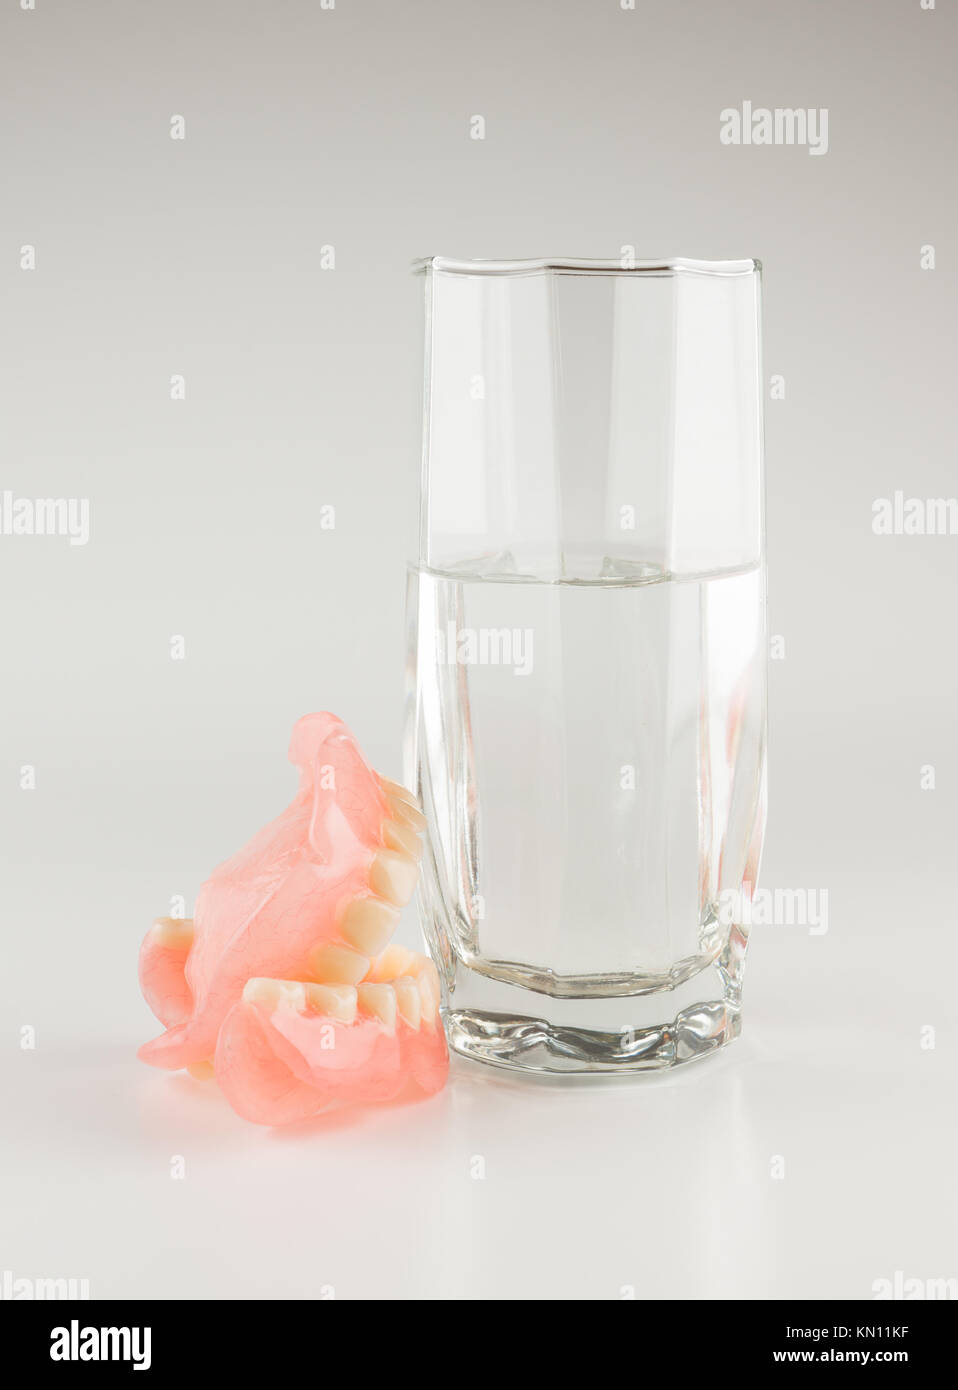 Acrylic removable prosthesis lies on a white background Stock Photo